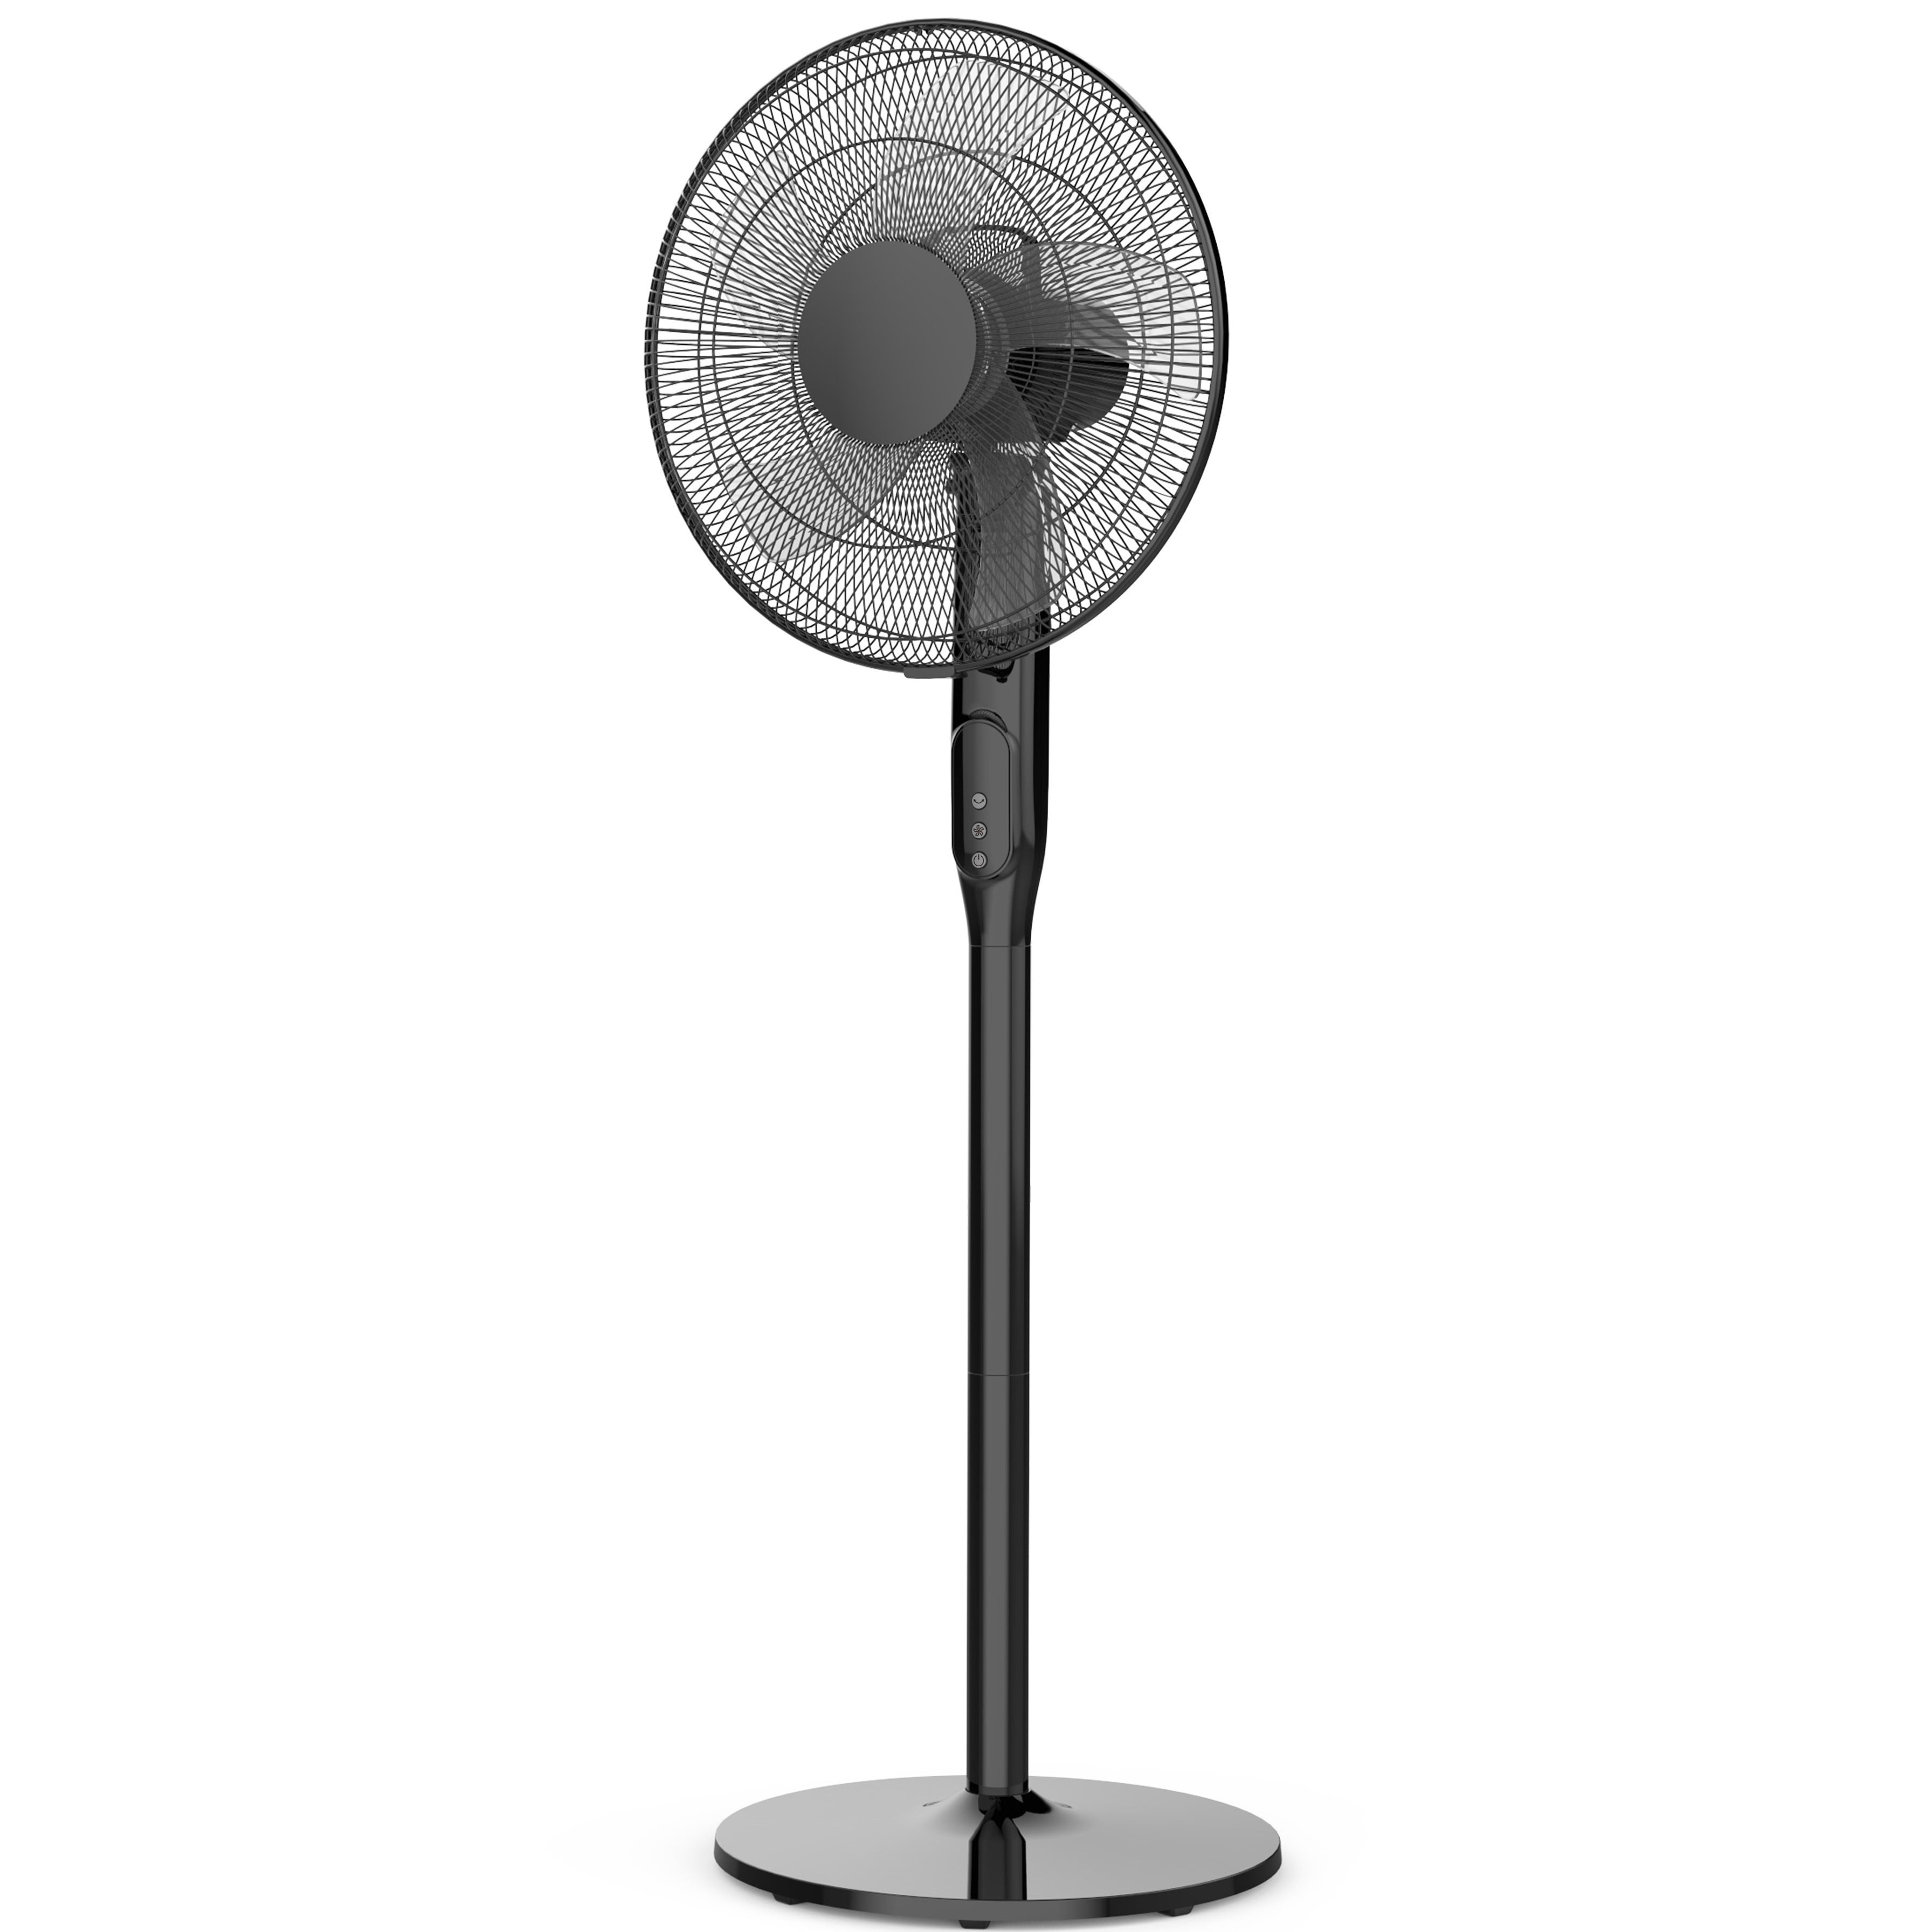 BARGAINS-Galore® 16 Pedestal OSCILLATING Stand Fan Desk Mini Fans Electric Tower Standing Home Office 16 OSCILLATING Stand Fan Cross 